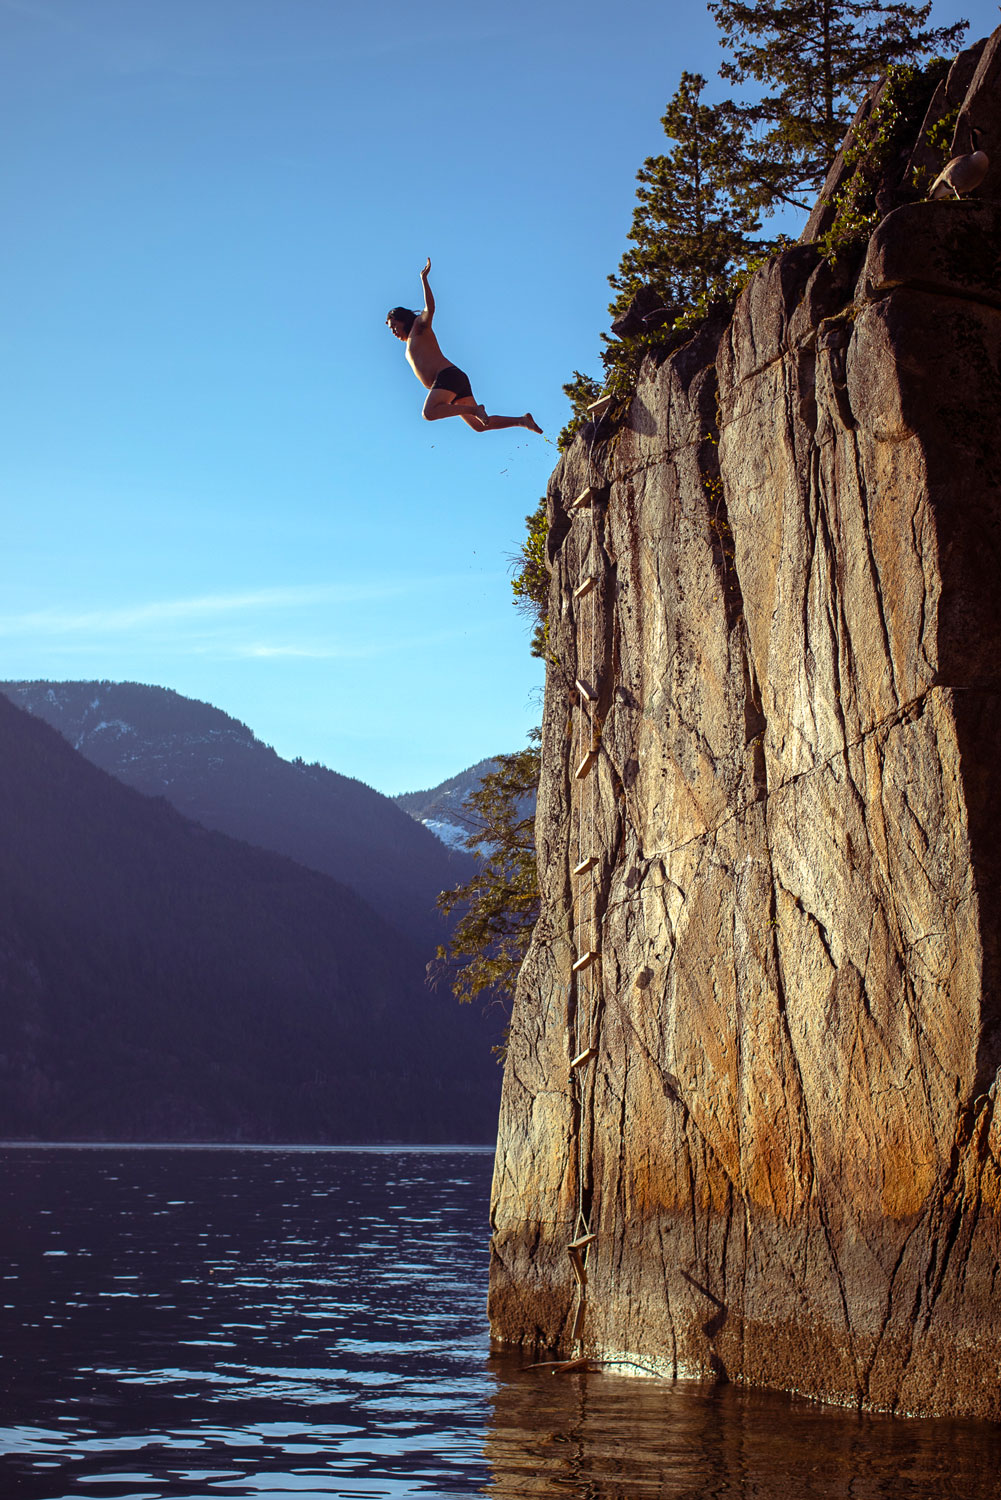 A person in swim trunks jumps from a cliff into the ocean